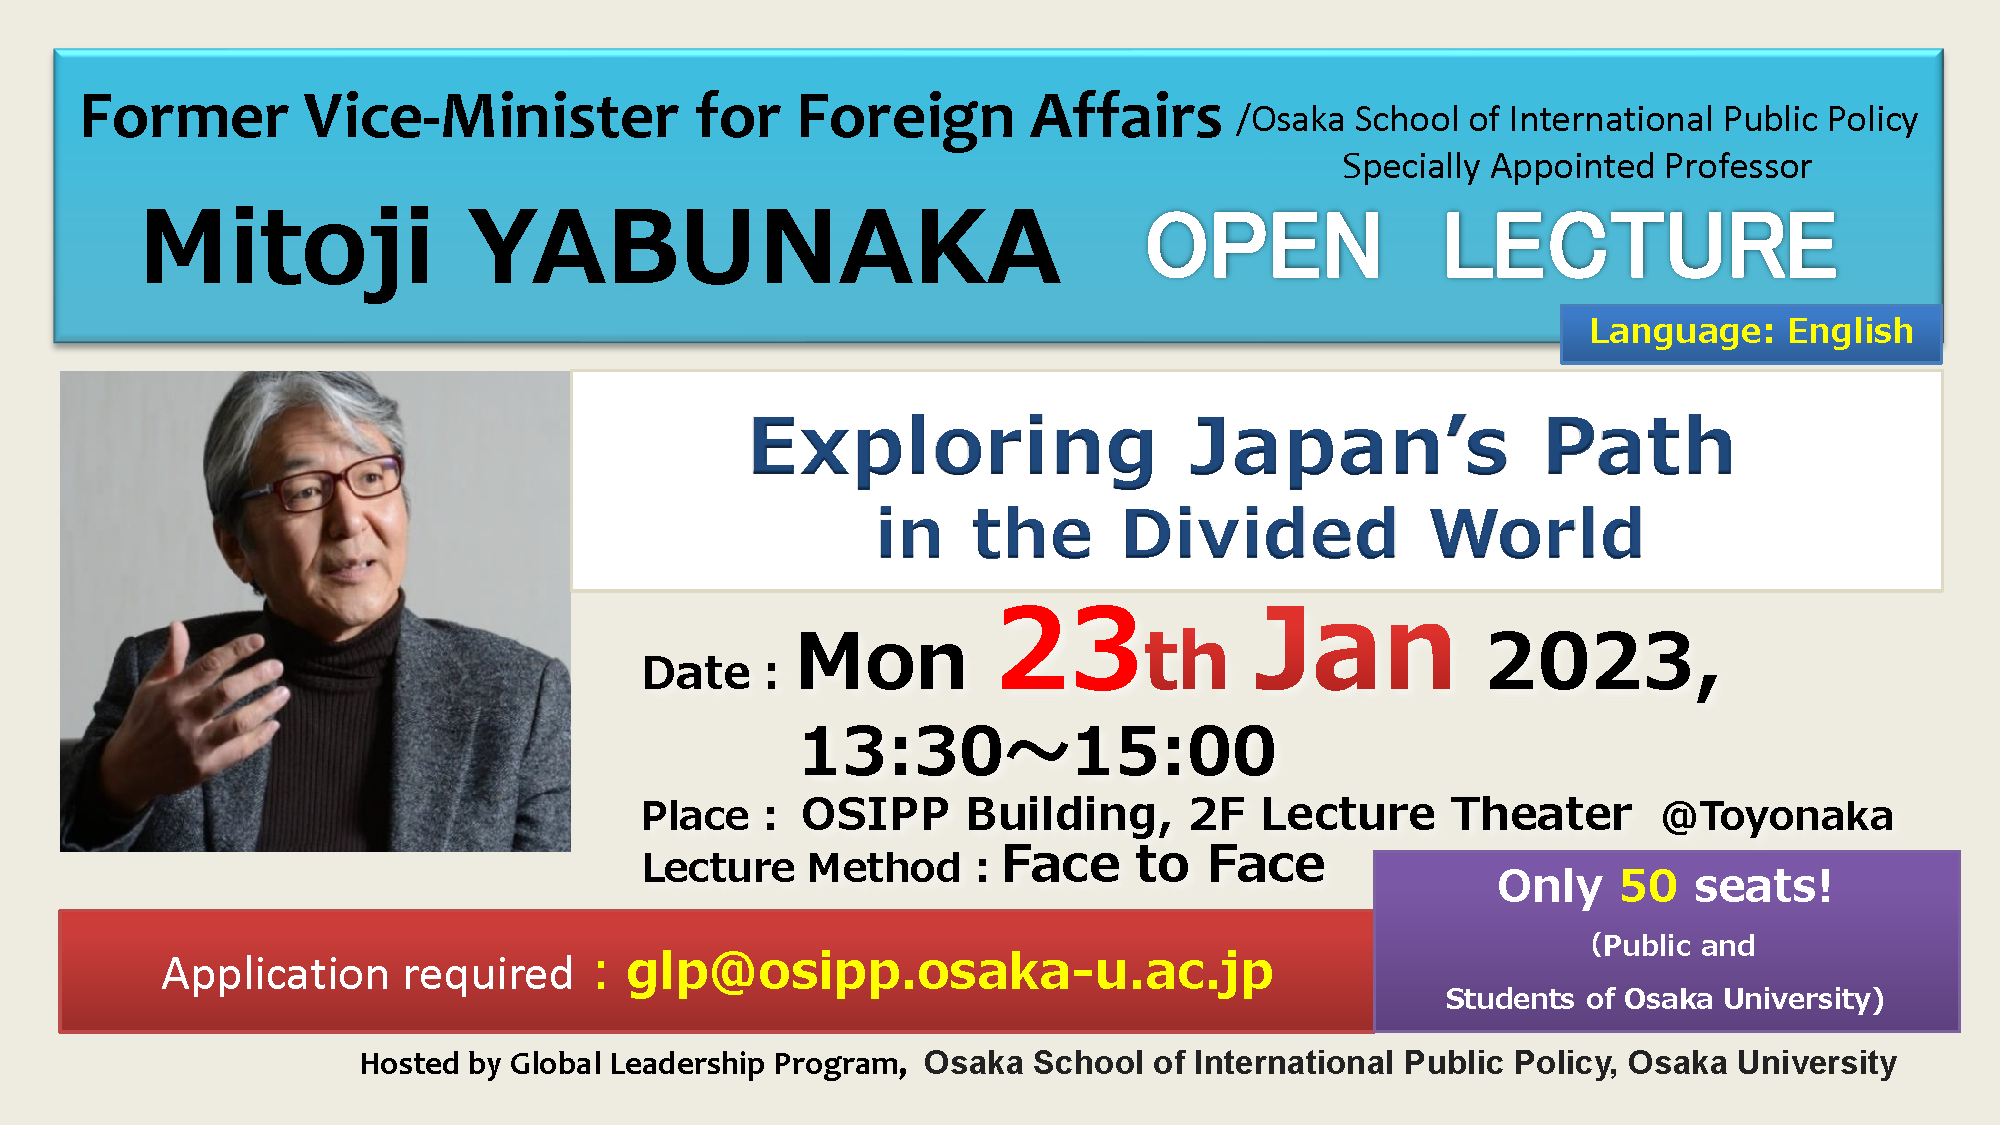 Open Lecture by Mitoji YABUNAKA (OSIPP Specially Appointed Professor): “Exploring Japan’s Path in the Divided World”